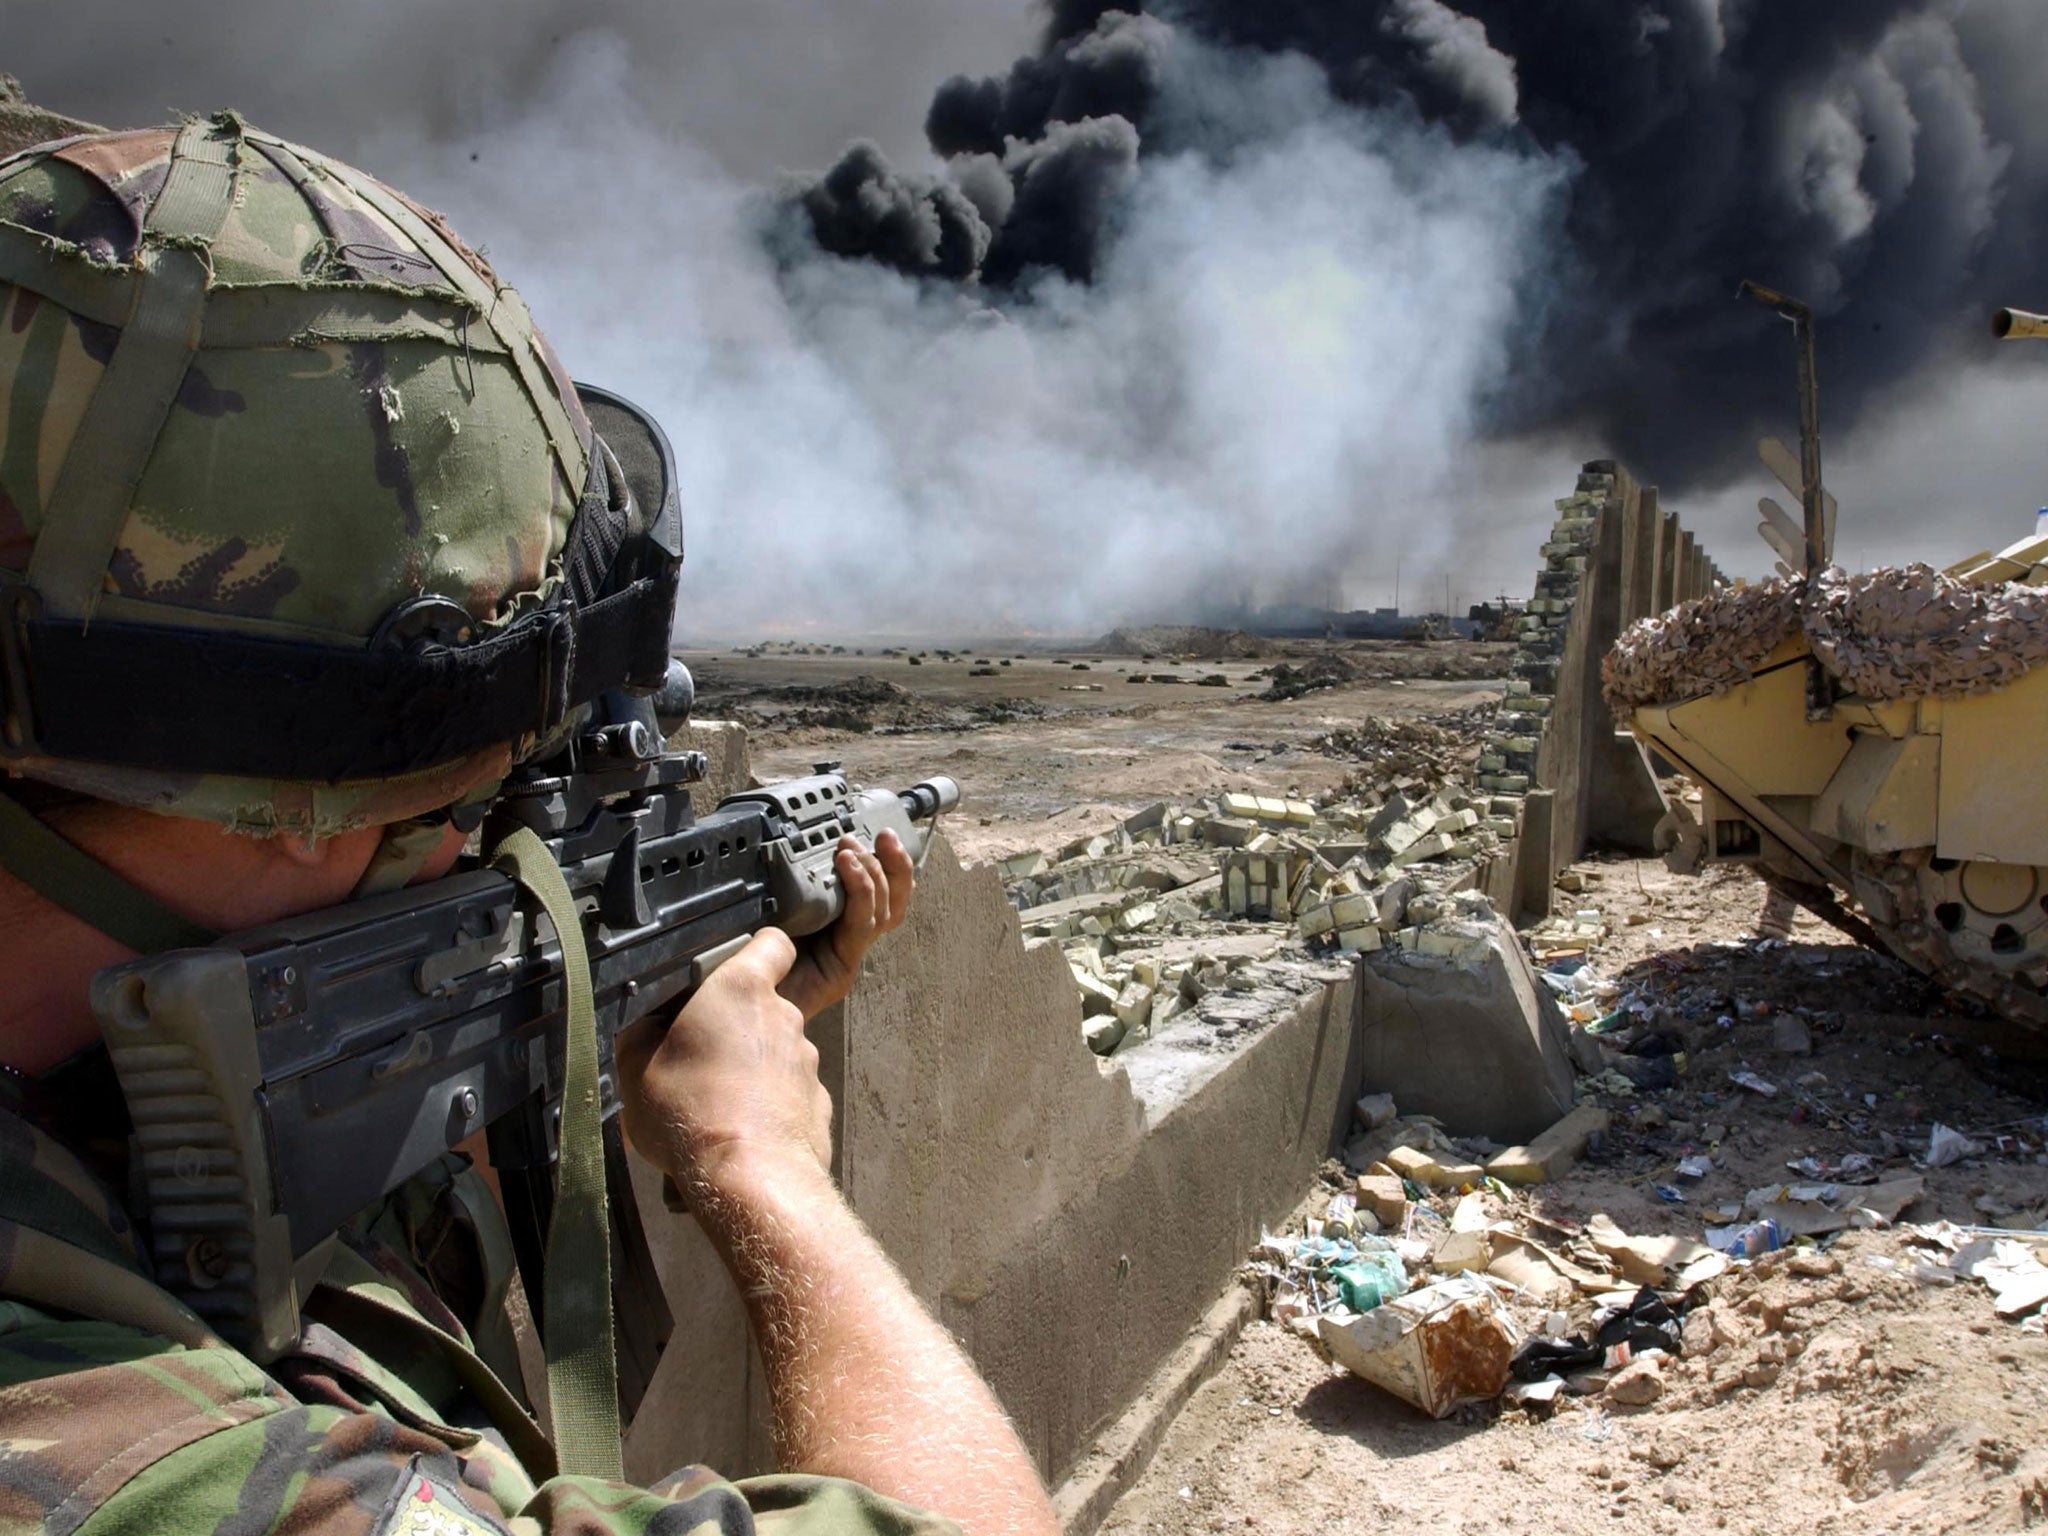 A British soldier in Basra, Iraq in 2003. The conflict still casts a shadow over Westminster